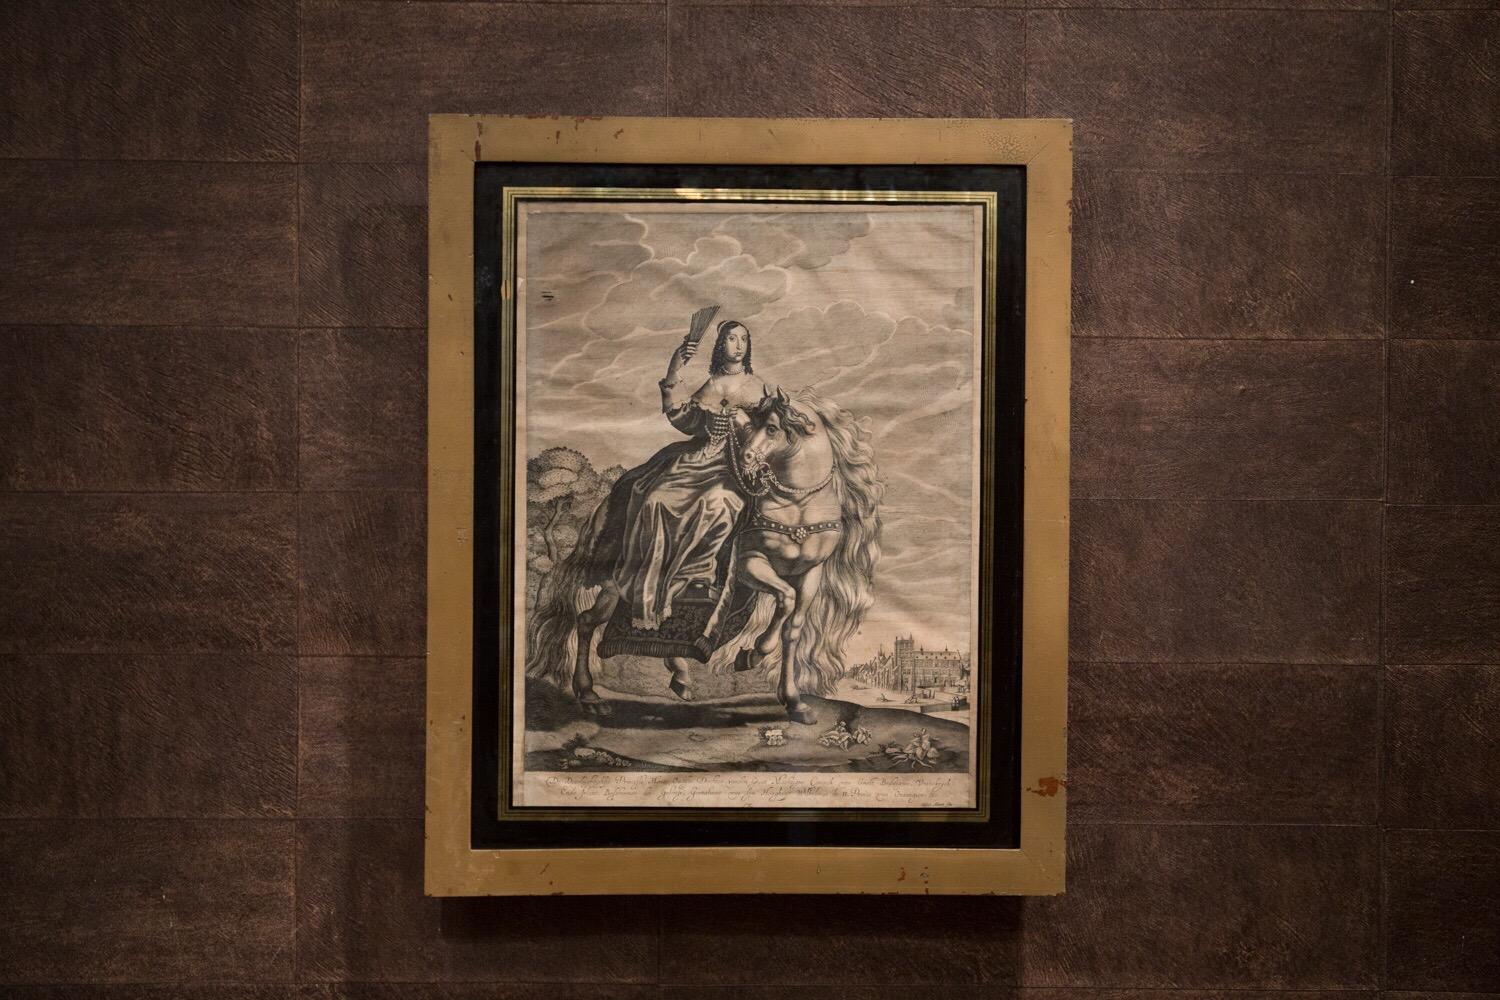 Framed engraving by Hugo (Huÿch) Allard or Allardt depicting the portrait of Princess Mary, Princess Royal (Mary Henrietta 1631-1660) She was Countness of Nassau by marriage to Prince William II.
Hugo Allardt the Elder Holland (1627-1684) also known